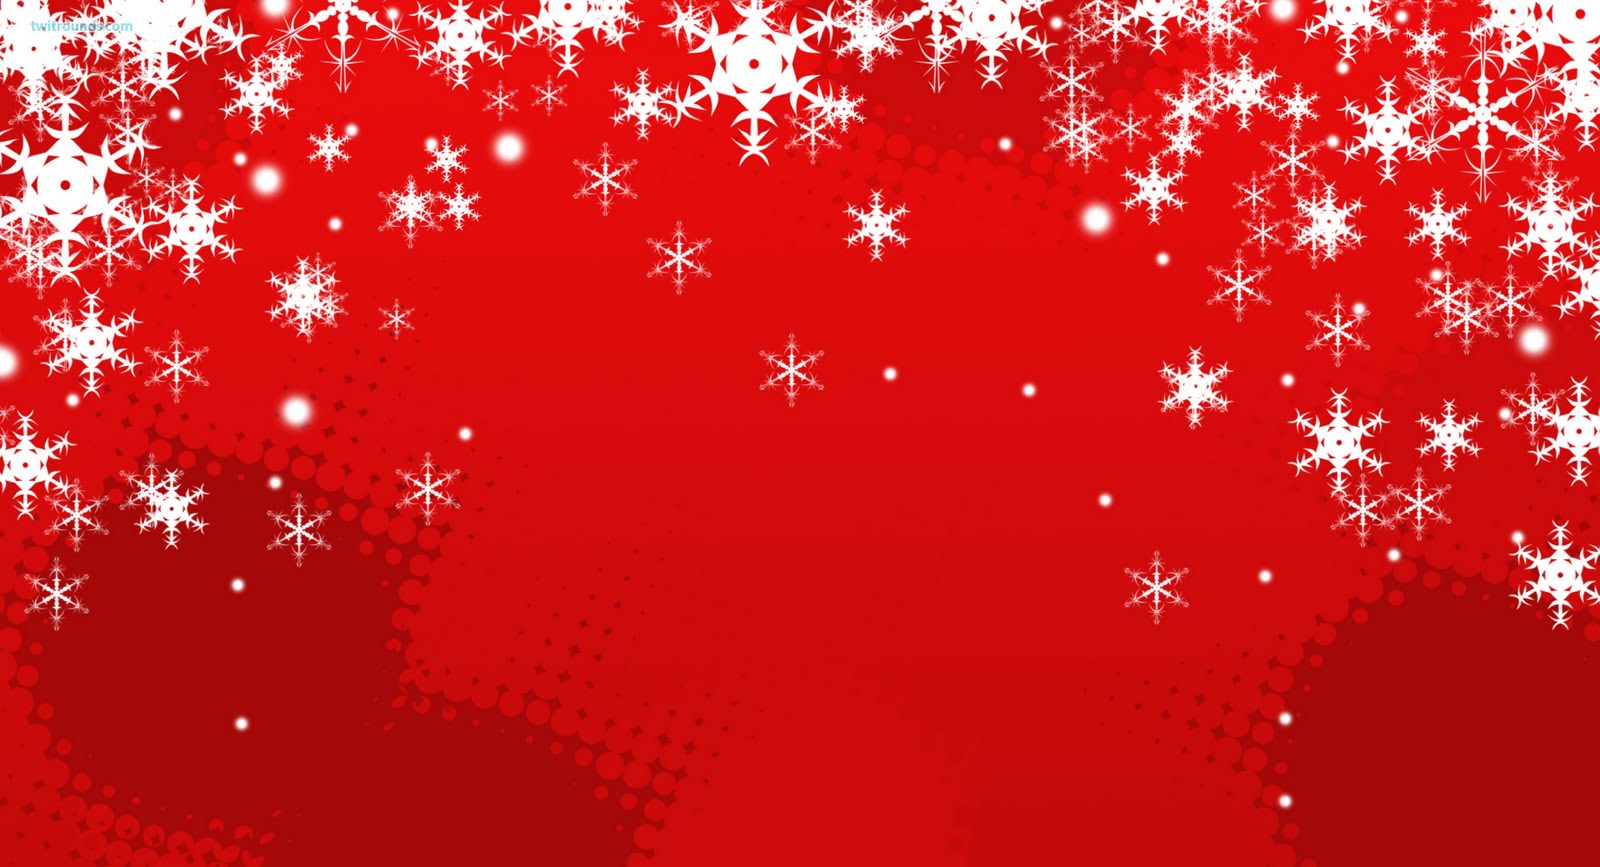 Red Holiday Art